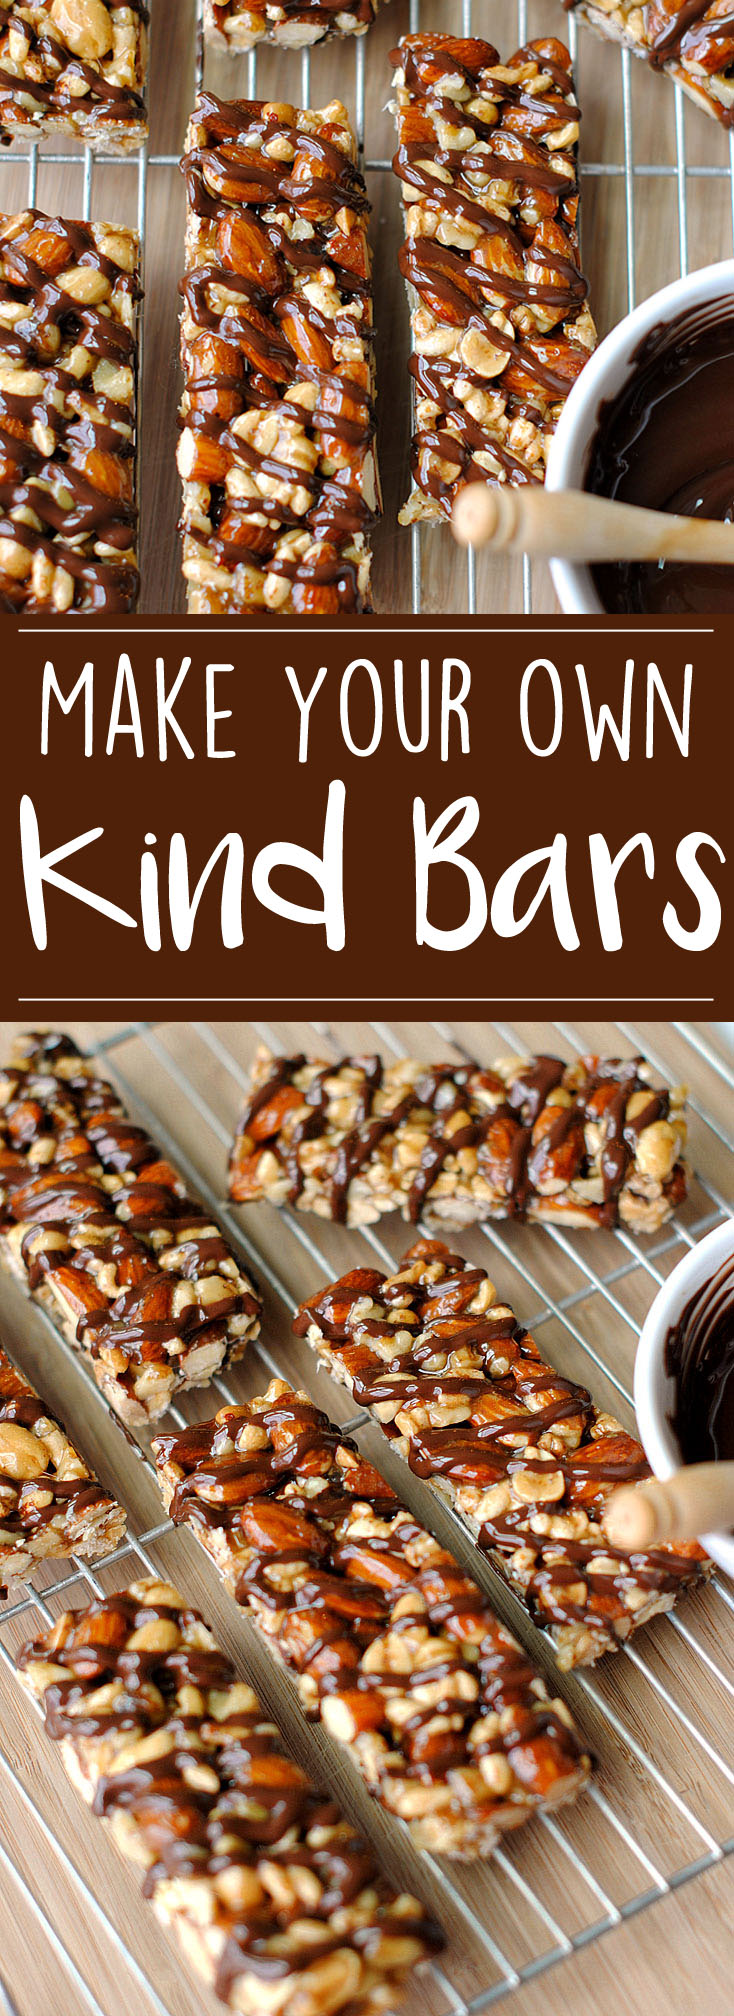 Now you can make your OWN delicious Dark Chocolate and Sea Salt KIND Bars at home that are healthier and much tastier with zero baking required!